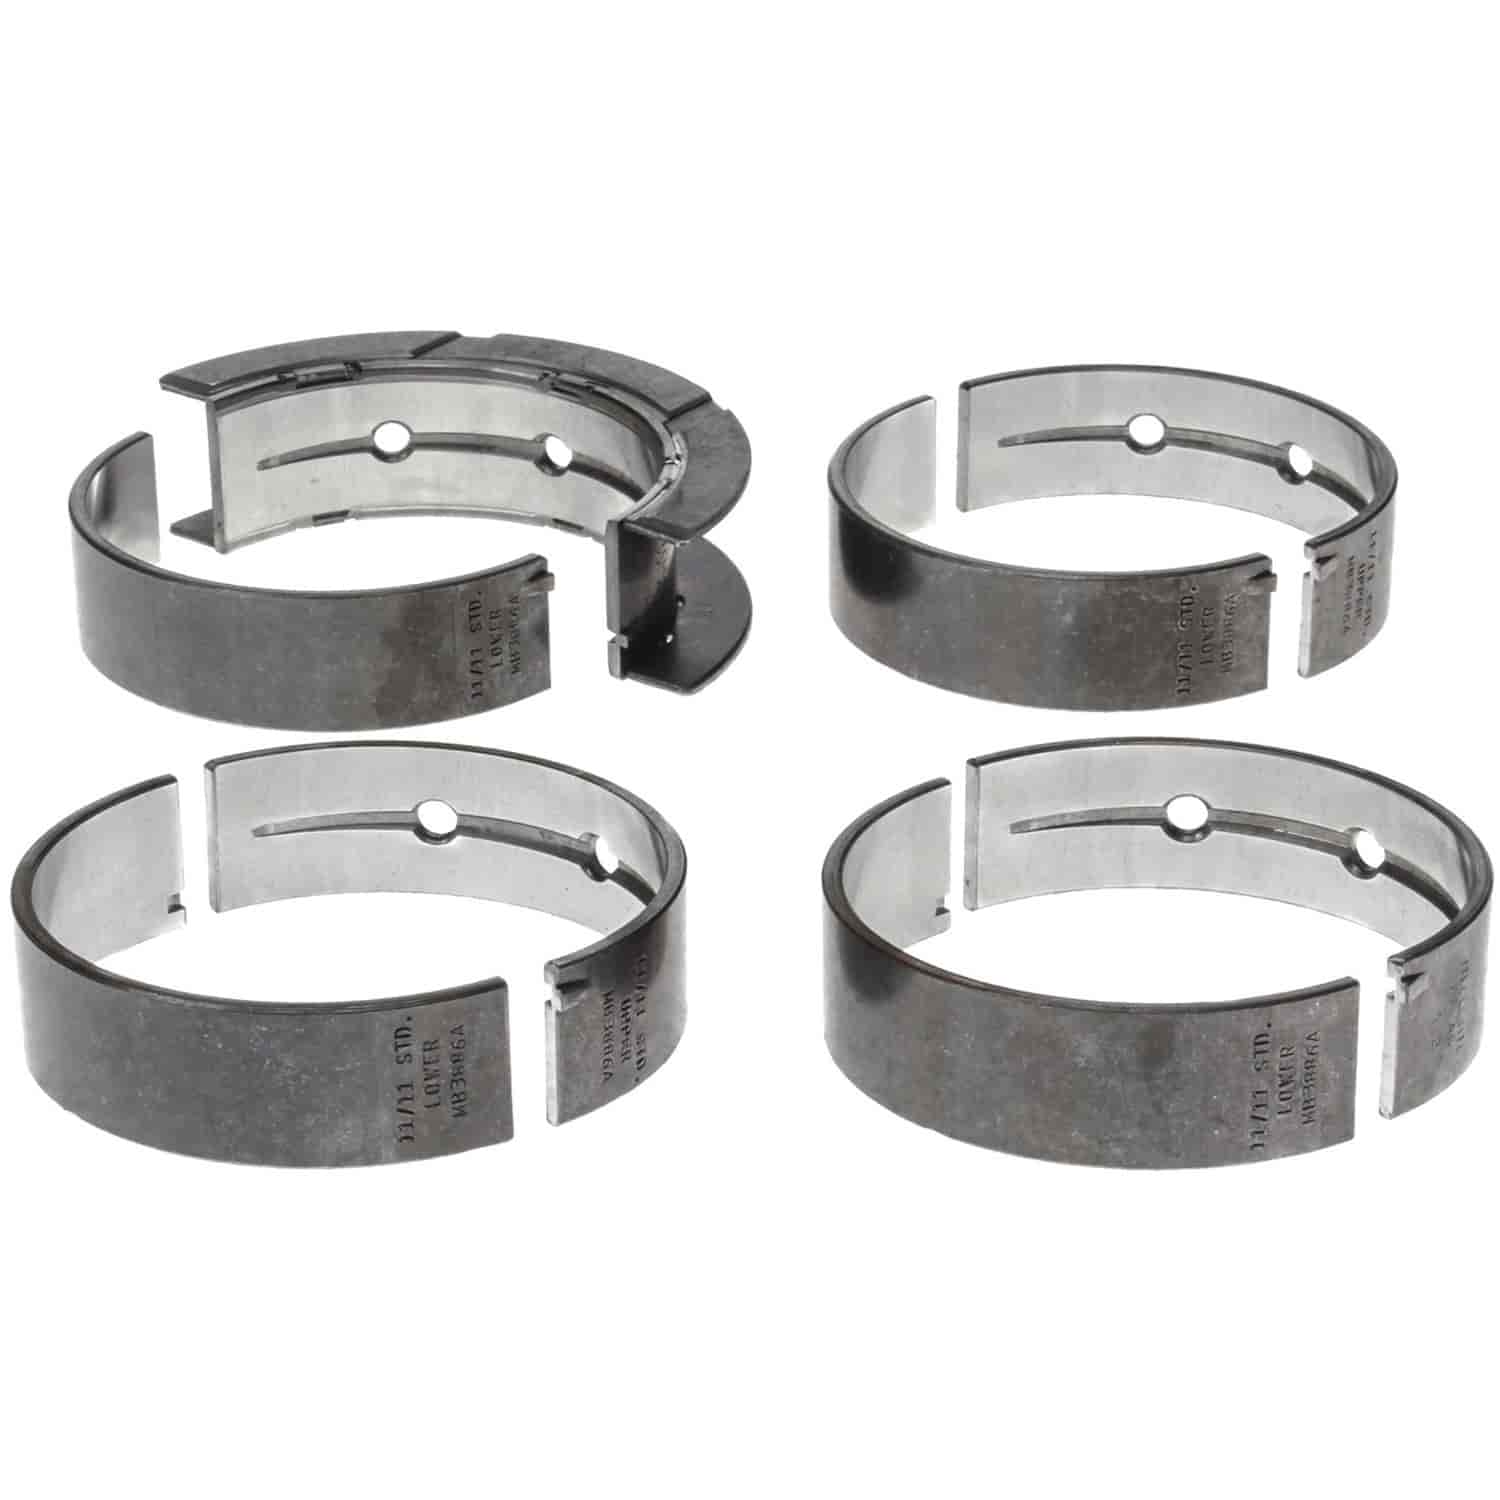 Main Bearing Set Chevy 2004-2011 High Feature V6 2.8/3.0/3.6L with Standard Size